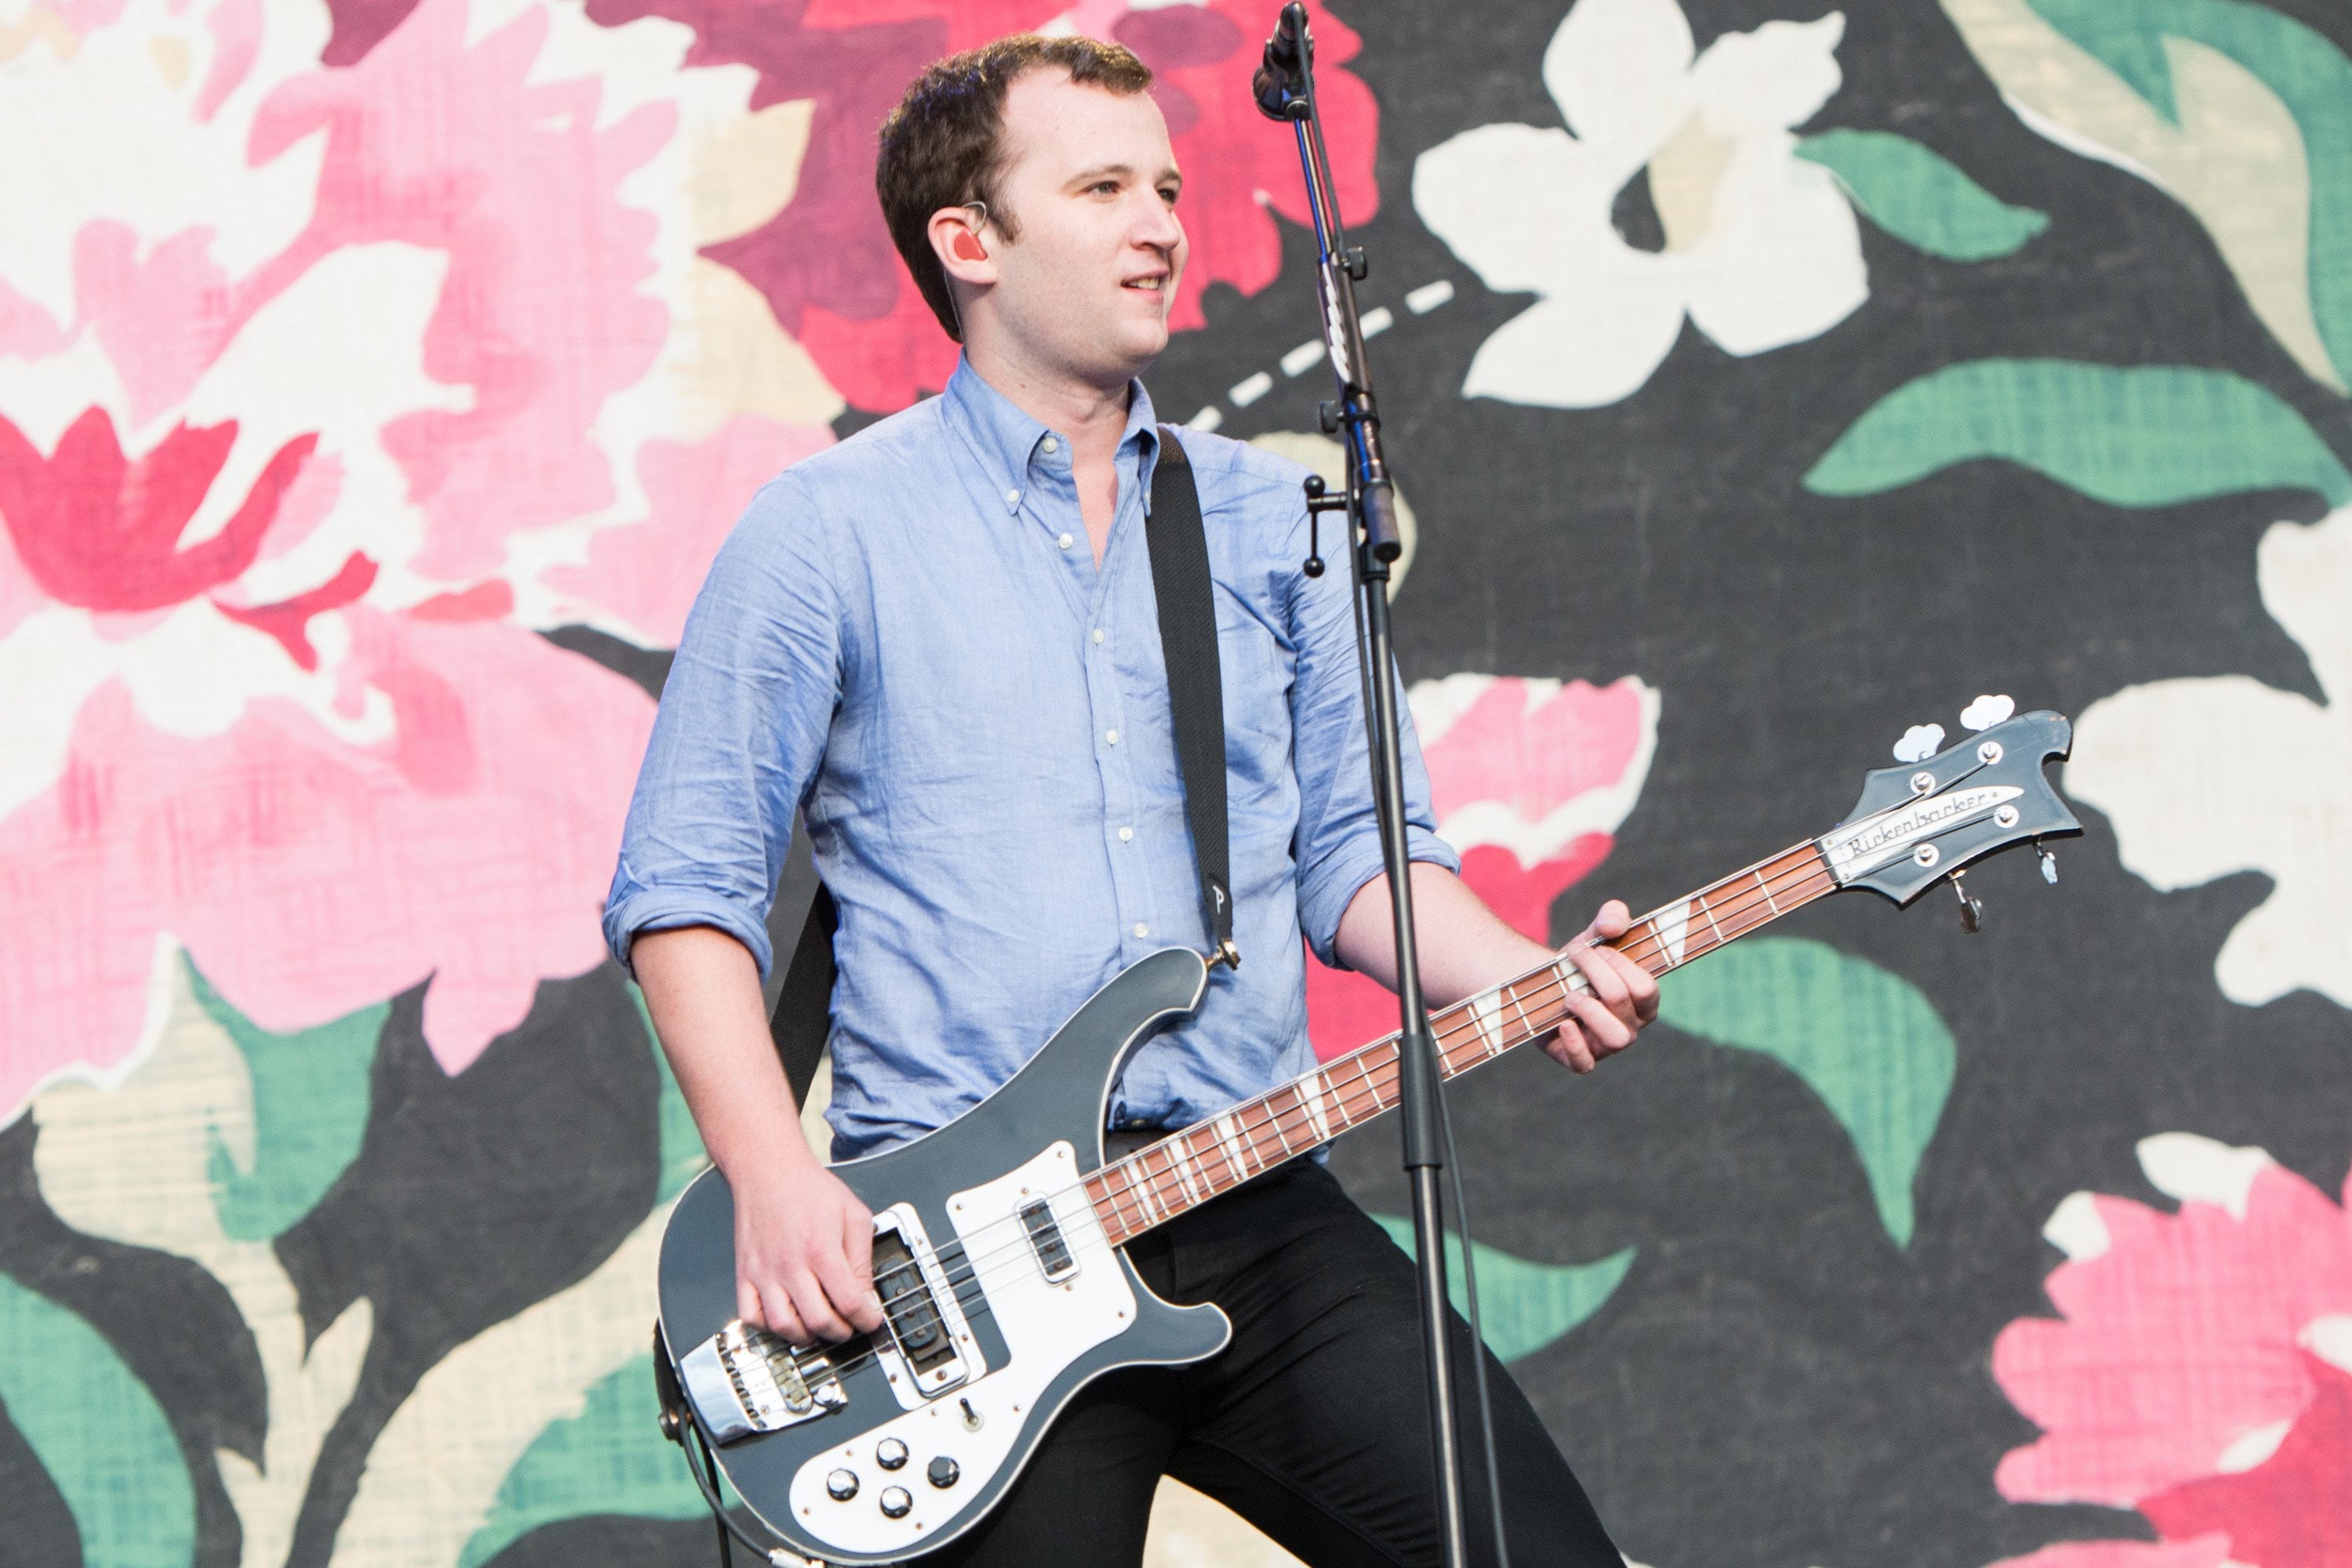 Chris Baio of Vampire Weekend performs at Reading Festival on Aug. 22, 2014, in Reading, England.